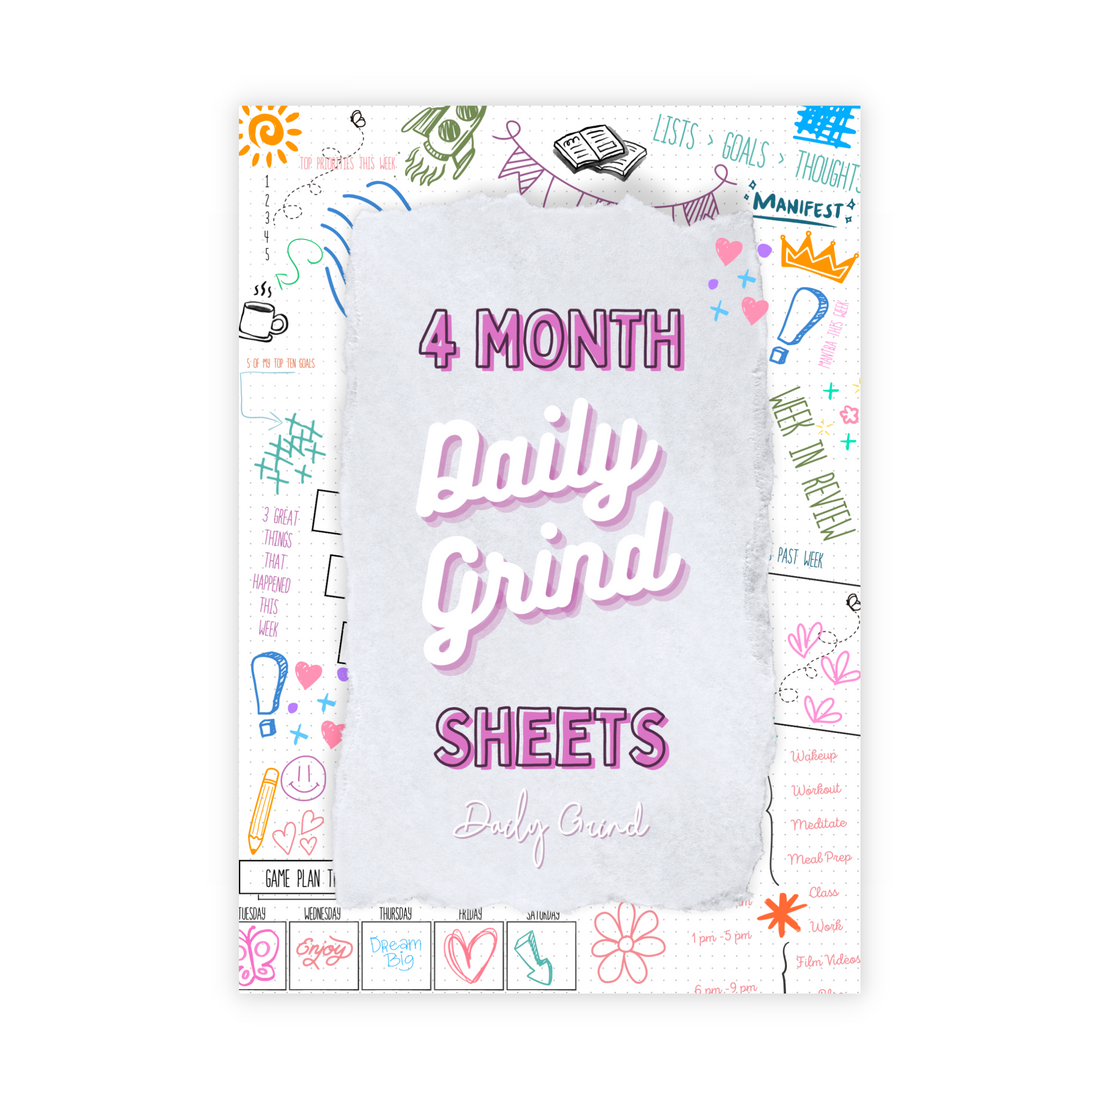 &quot;4 Month Daily Grind Sheets&quot; cover page